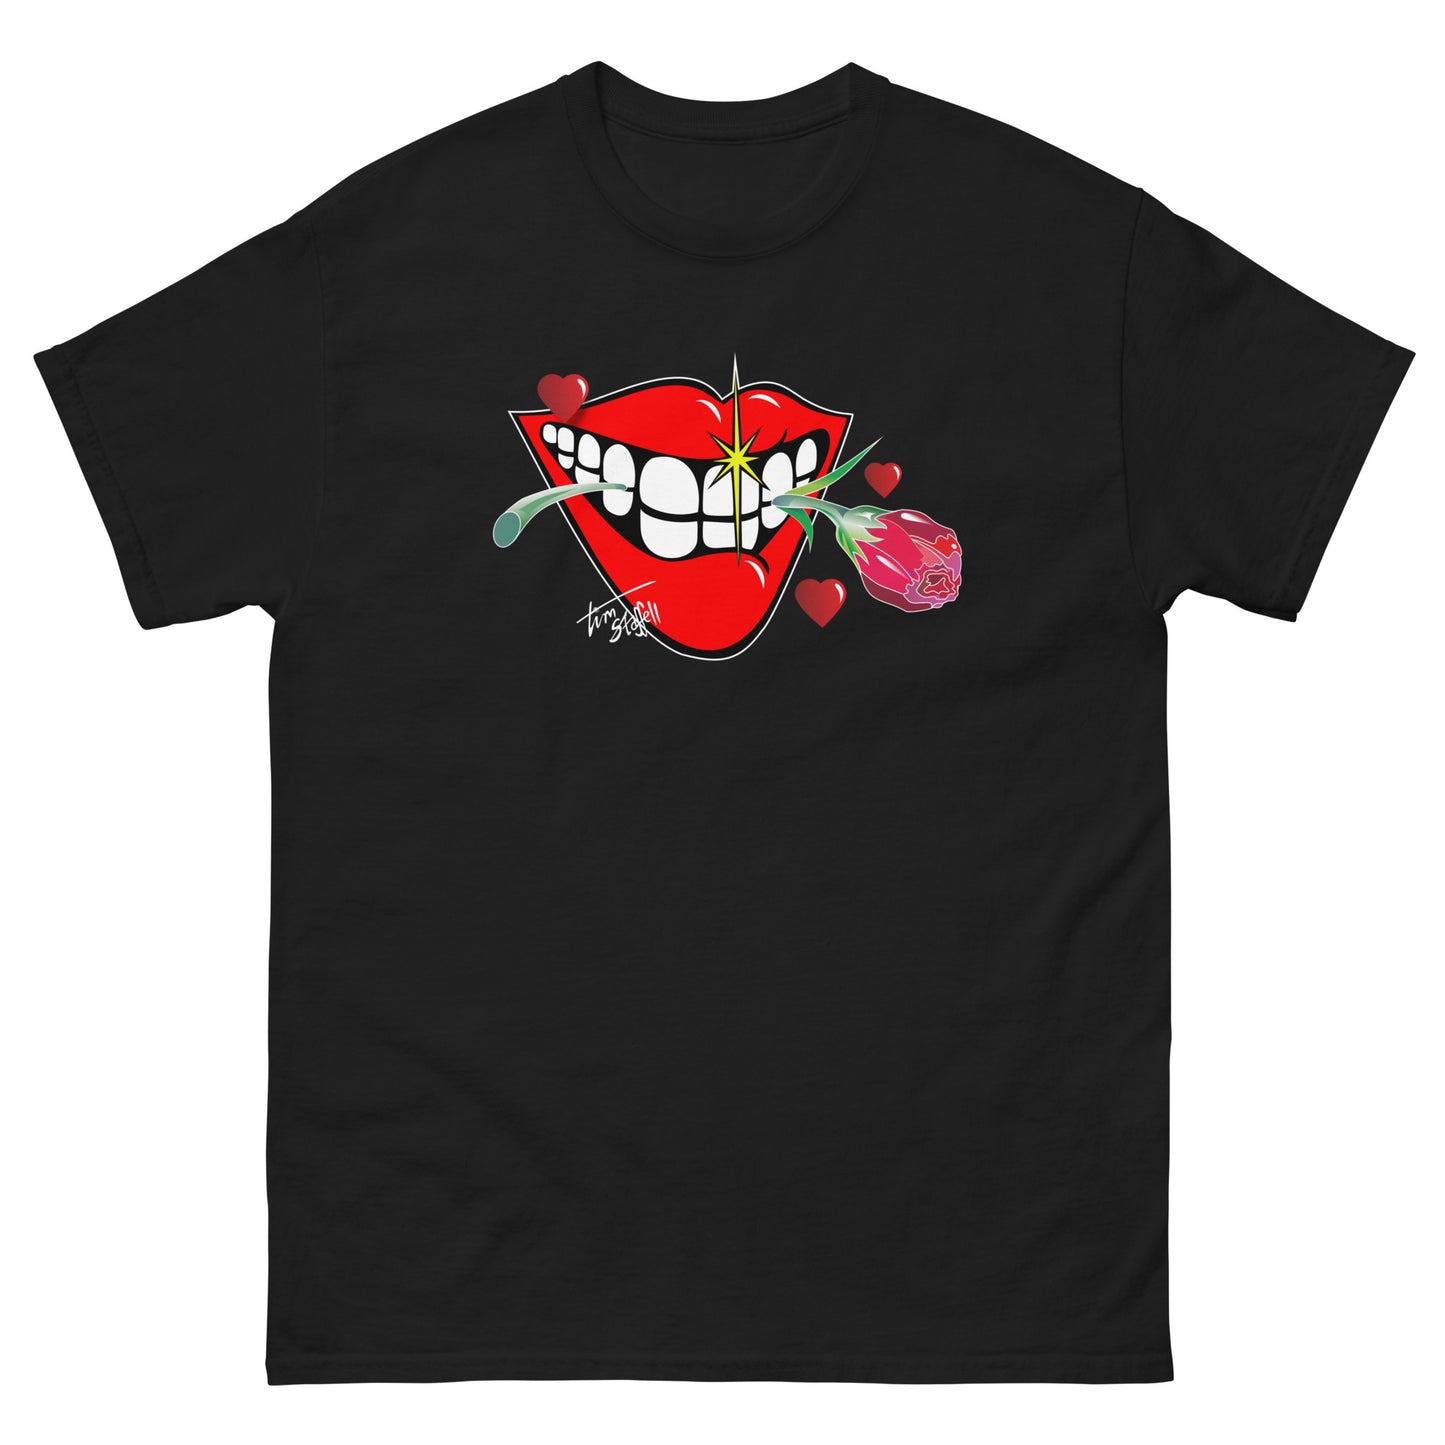 'Smile', you're my Valentine T-Shirt